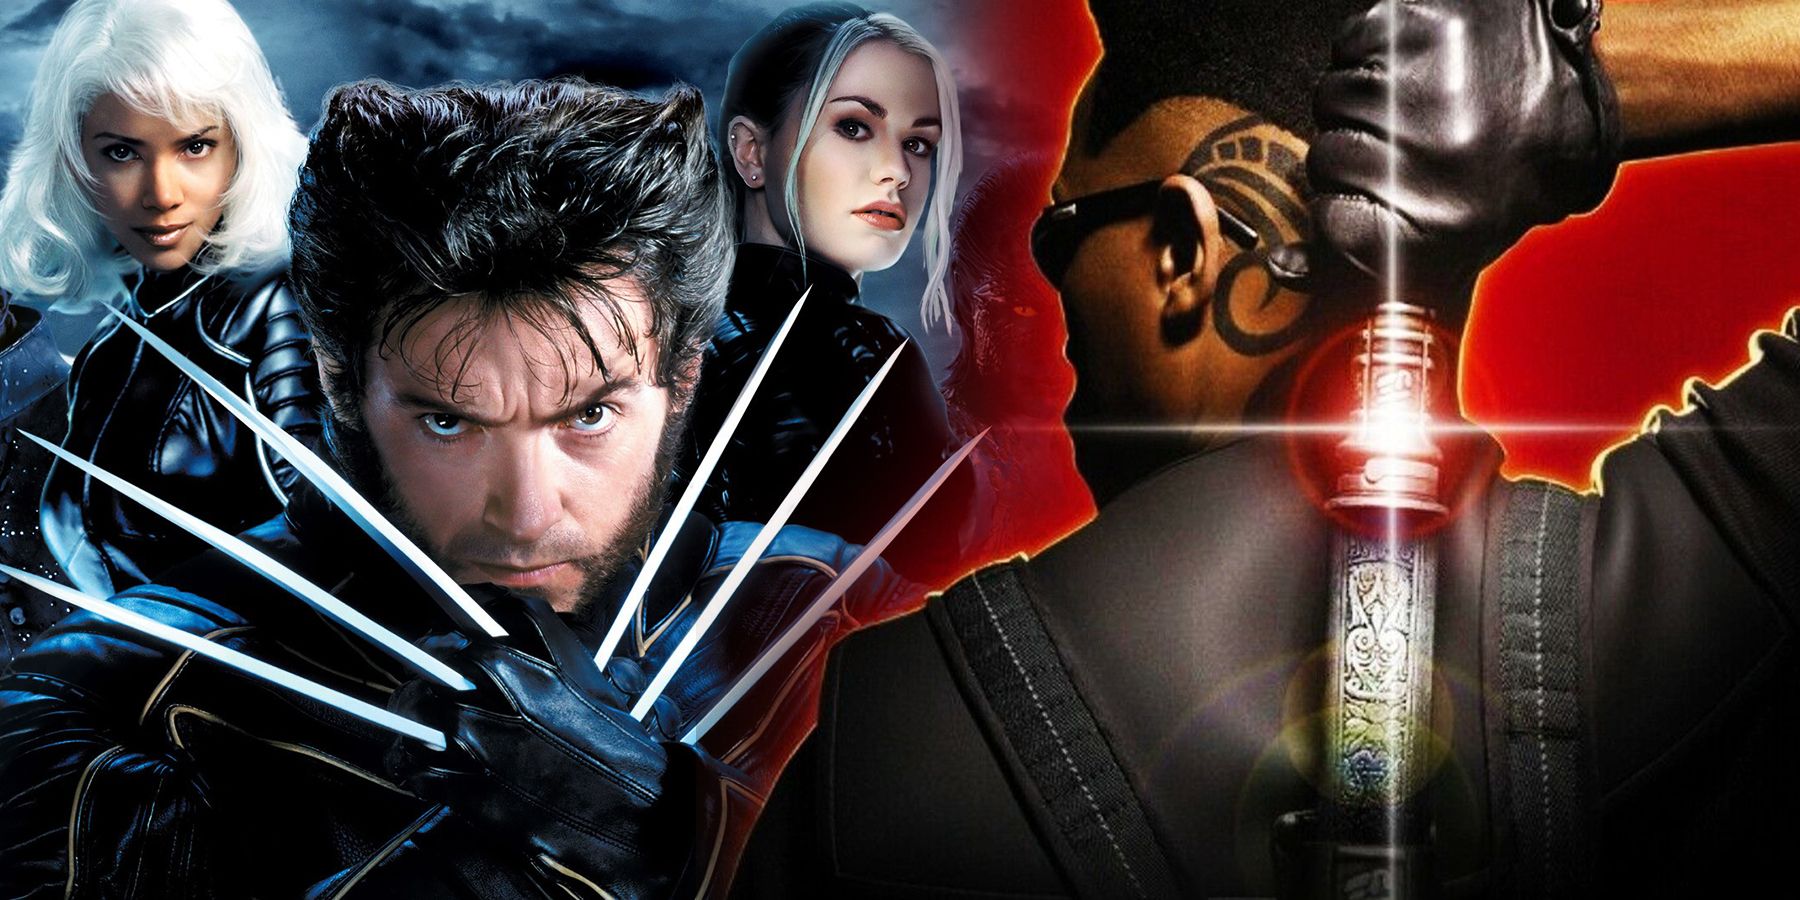 Storm, Wolverine and Rogue from 2000's X-Men and Blade from 1998's Blade